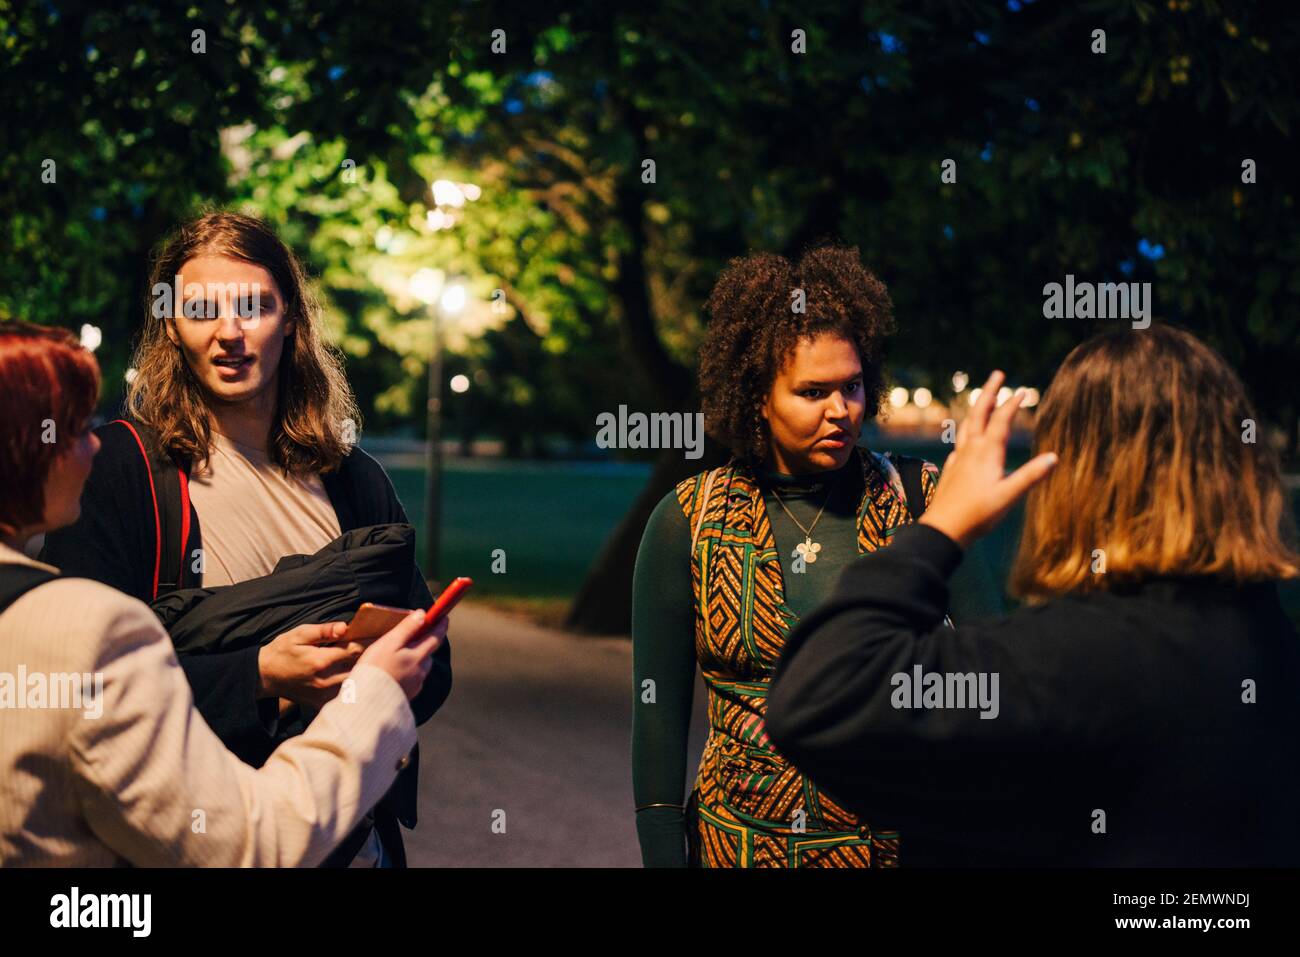 Female and male friends talking with each other in college campus at night Stock Photo